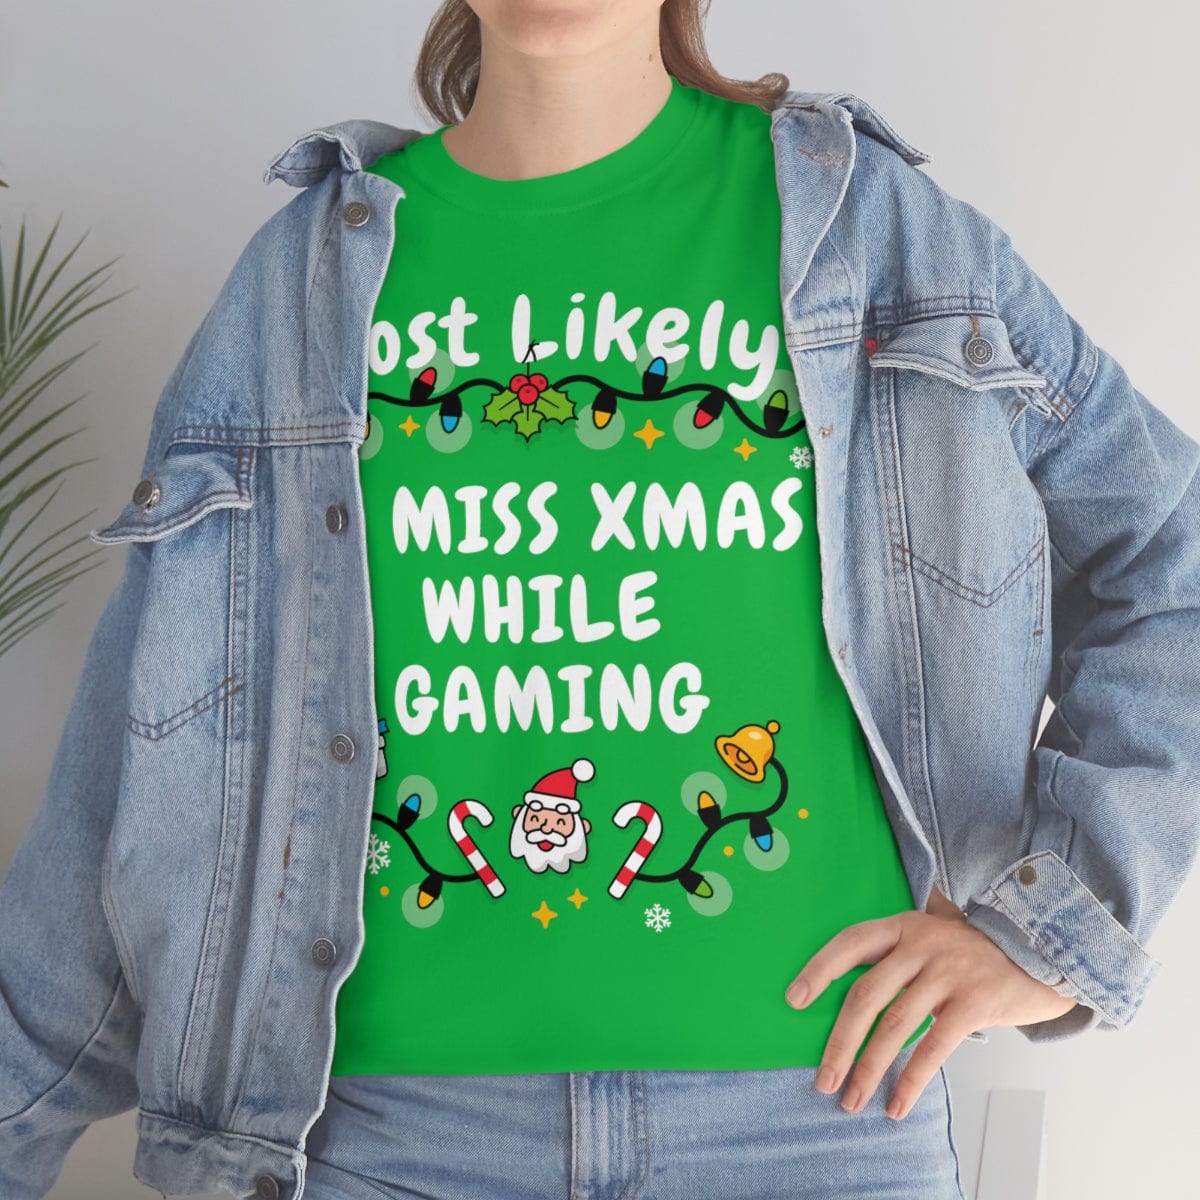 TO MISS XMAS WHILE GAMING